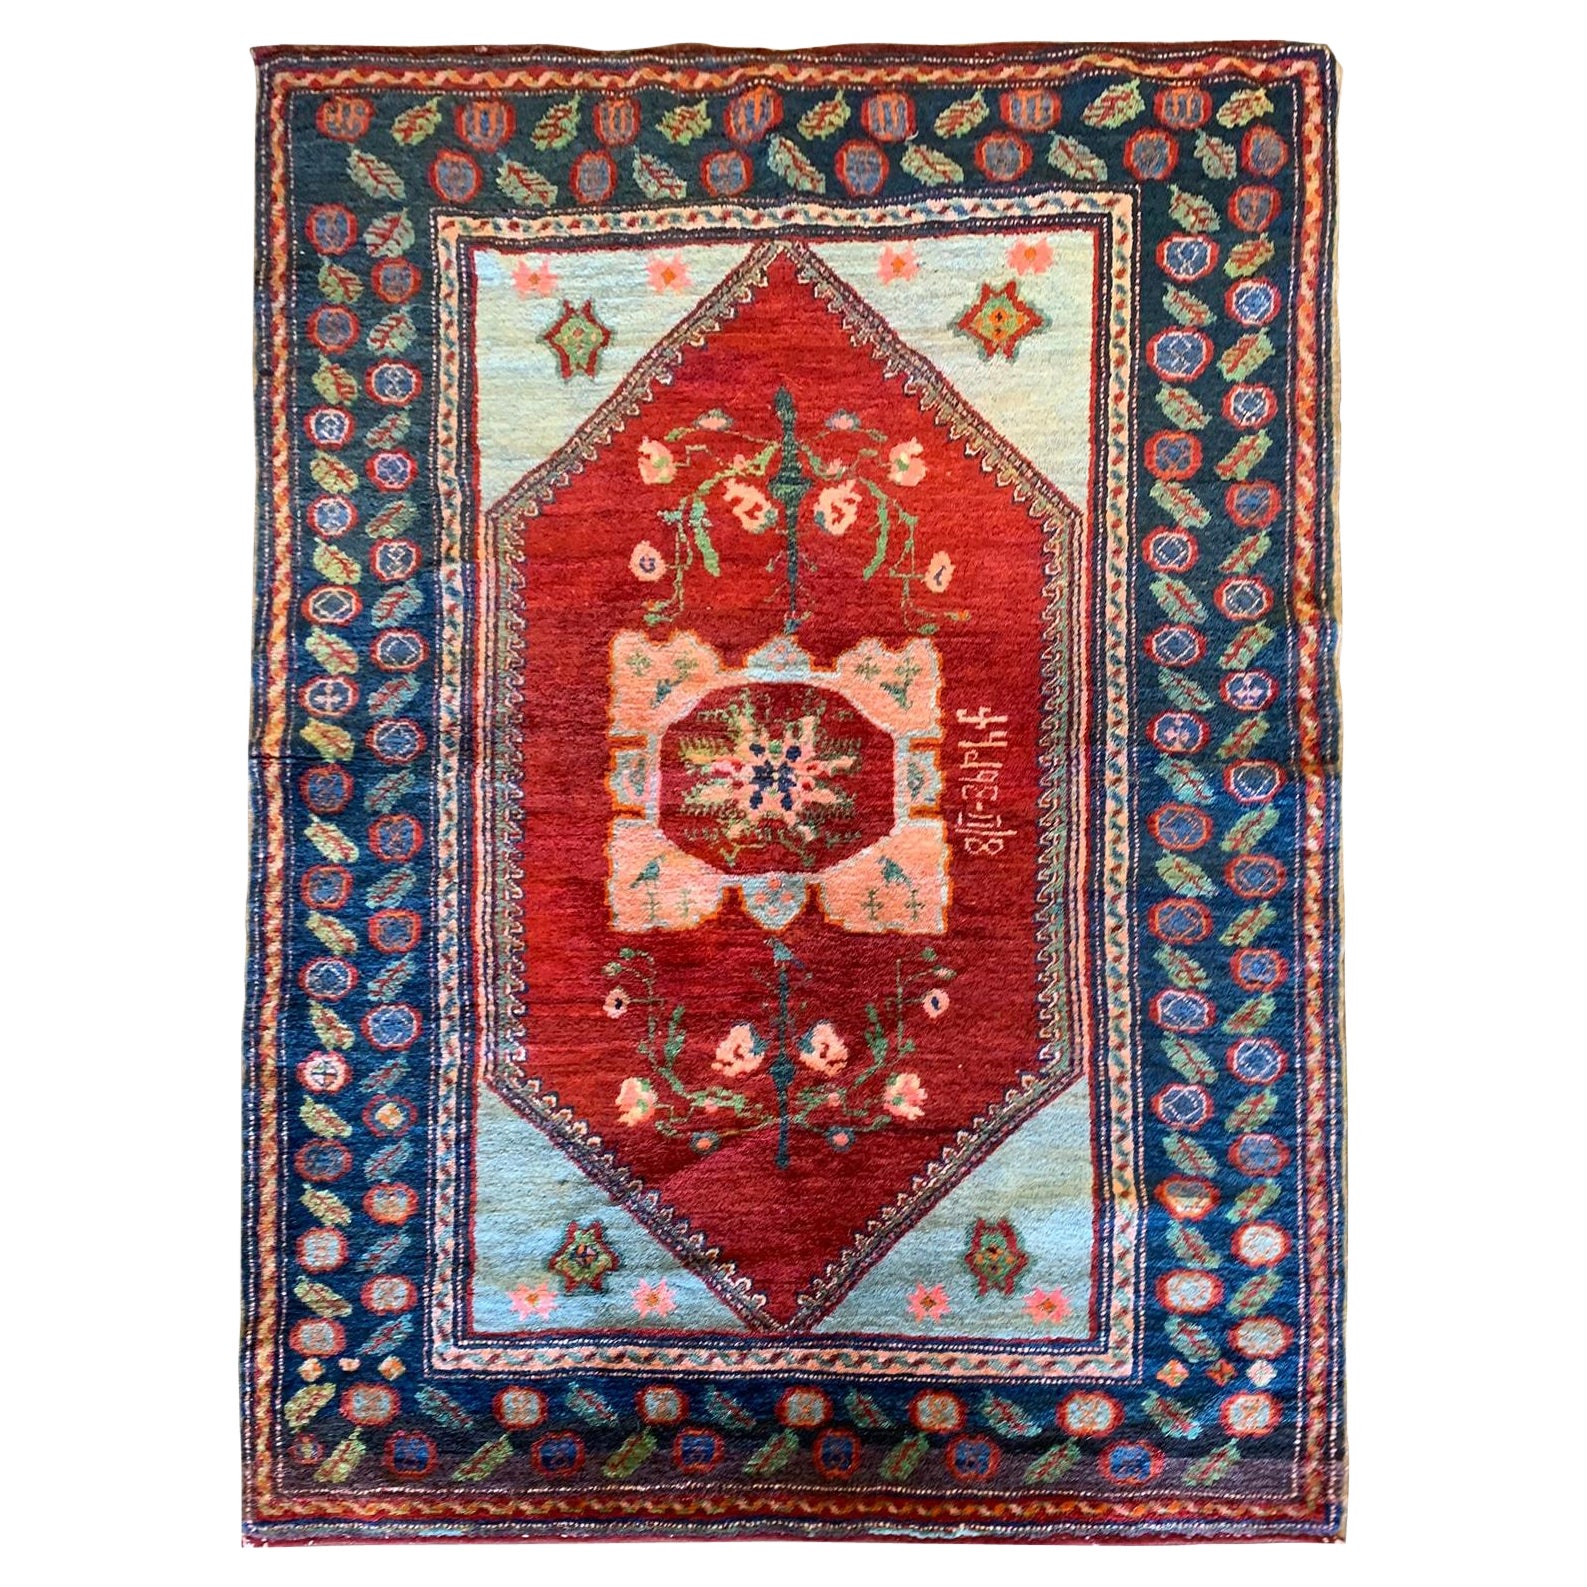 Antique Collectible Armenian rug, Small Red Wool Rug 1880